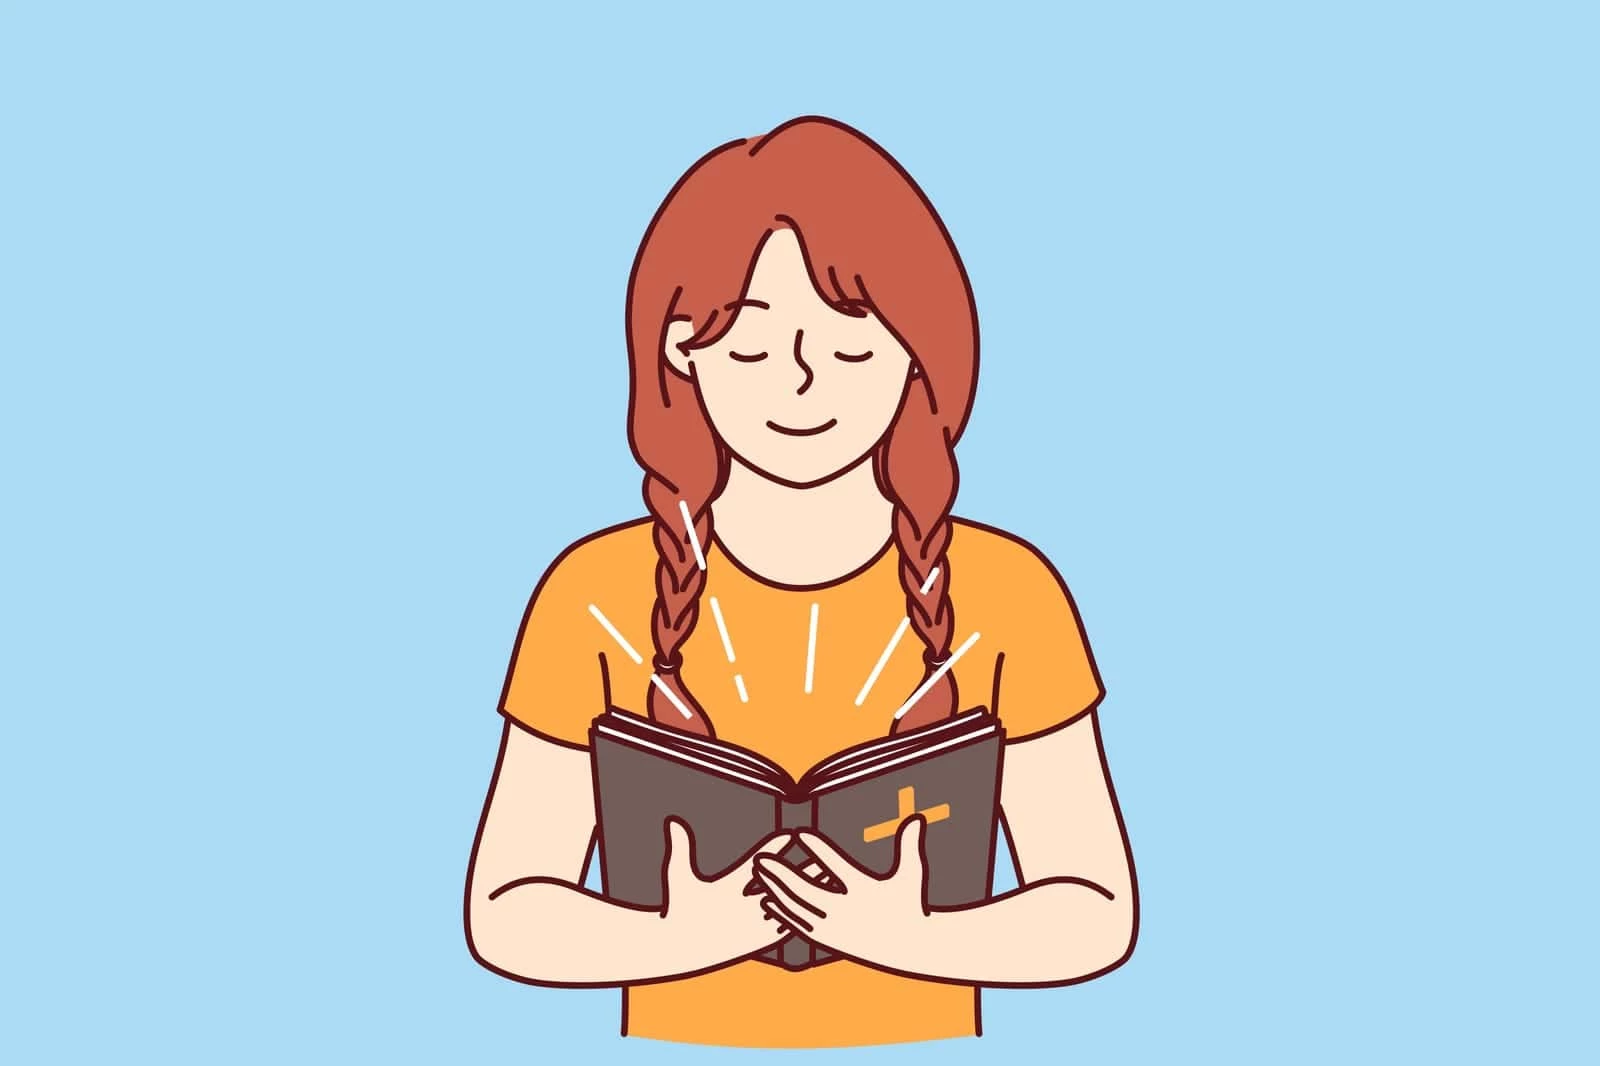 young girl with red braided hair, reading a bible with a peaceful expression against a blue background.